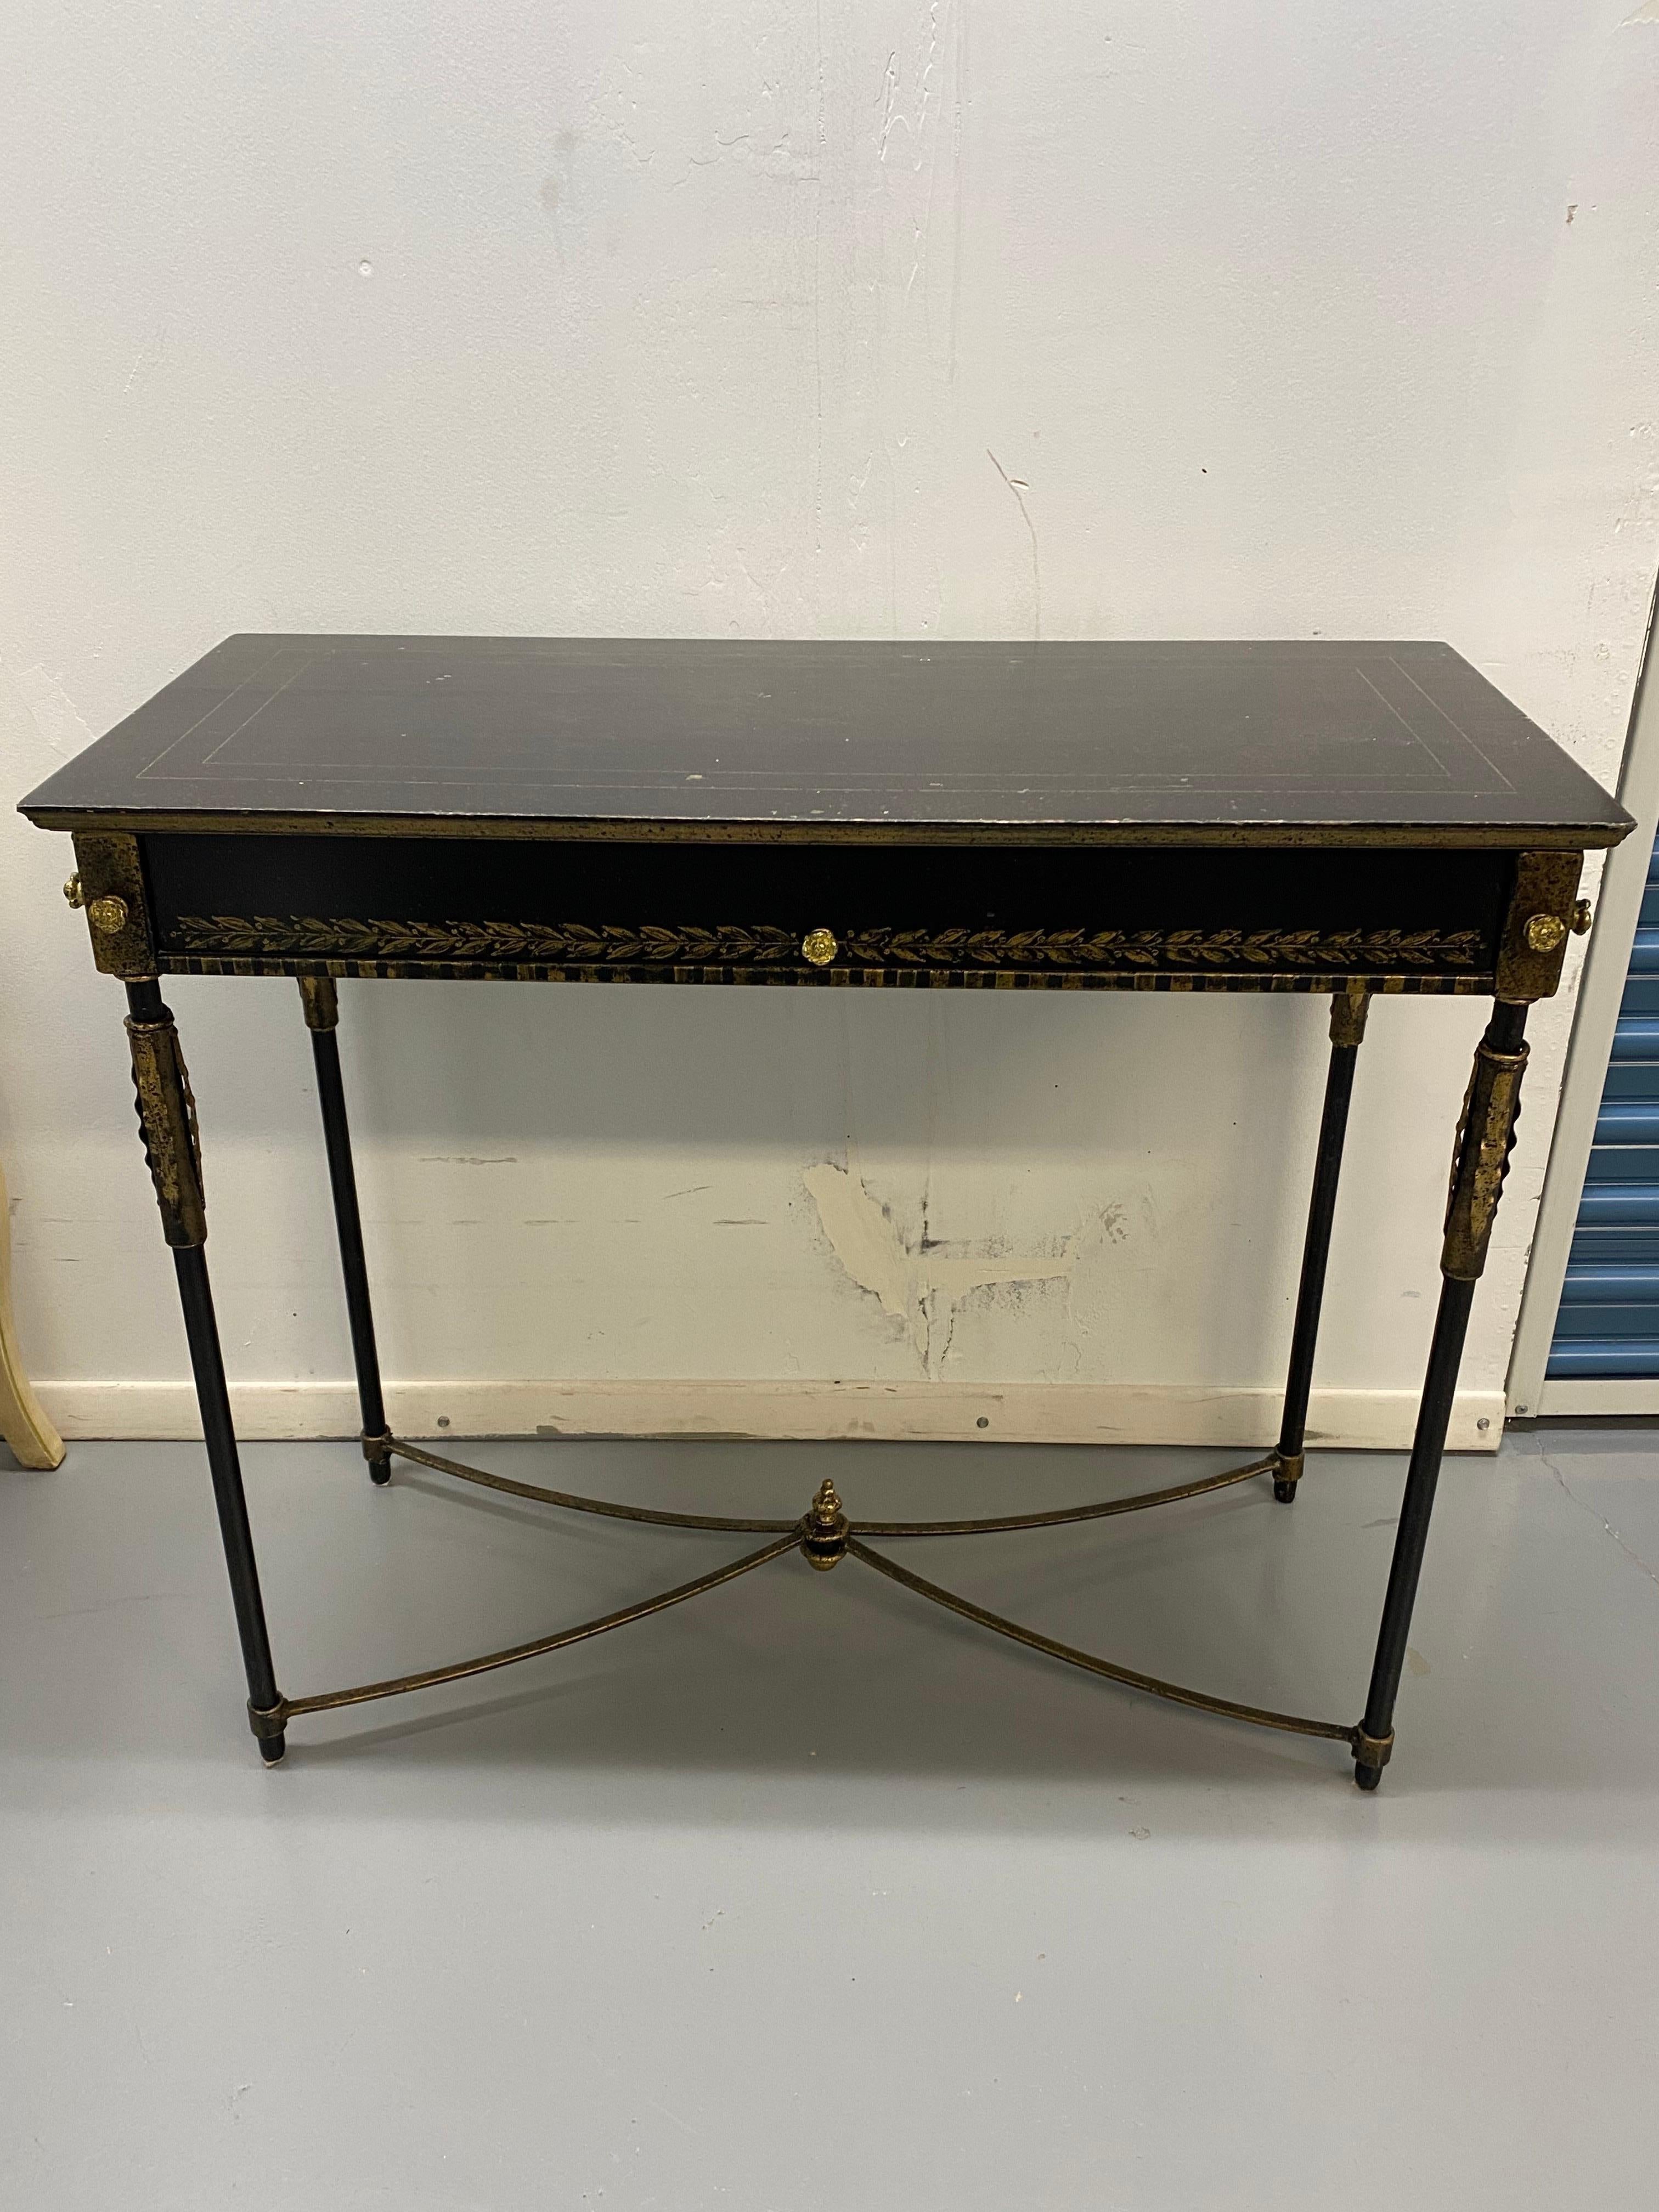 Neoclassical Style Table with Painted Decoration by Art & Commerce
Ebonized wood frame with metal stretcher and brass detailing. Speckled faux finish on top with gold painted leaf decoration on front rail, pin stripe banding on top. Brass finials on